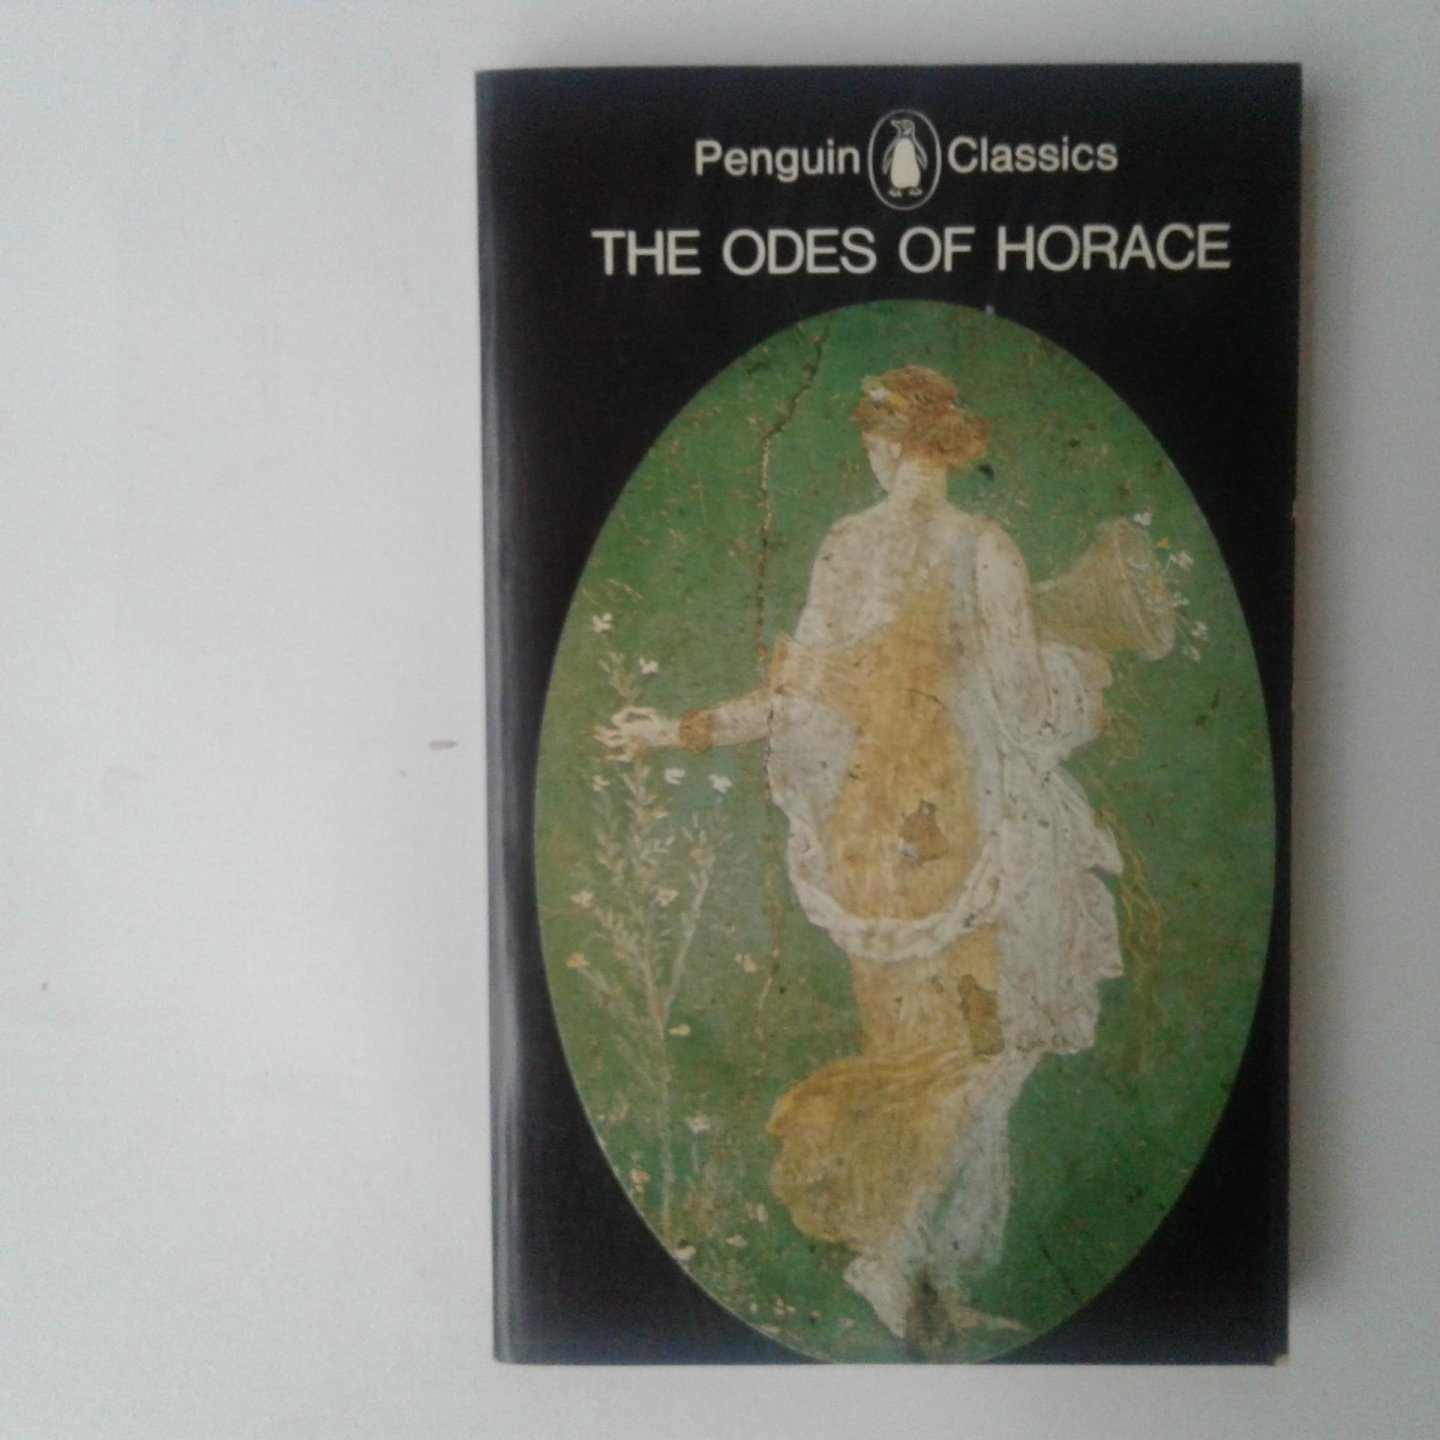  - The Odes of Horace